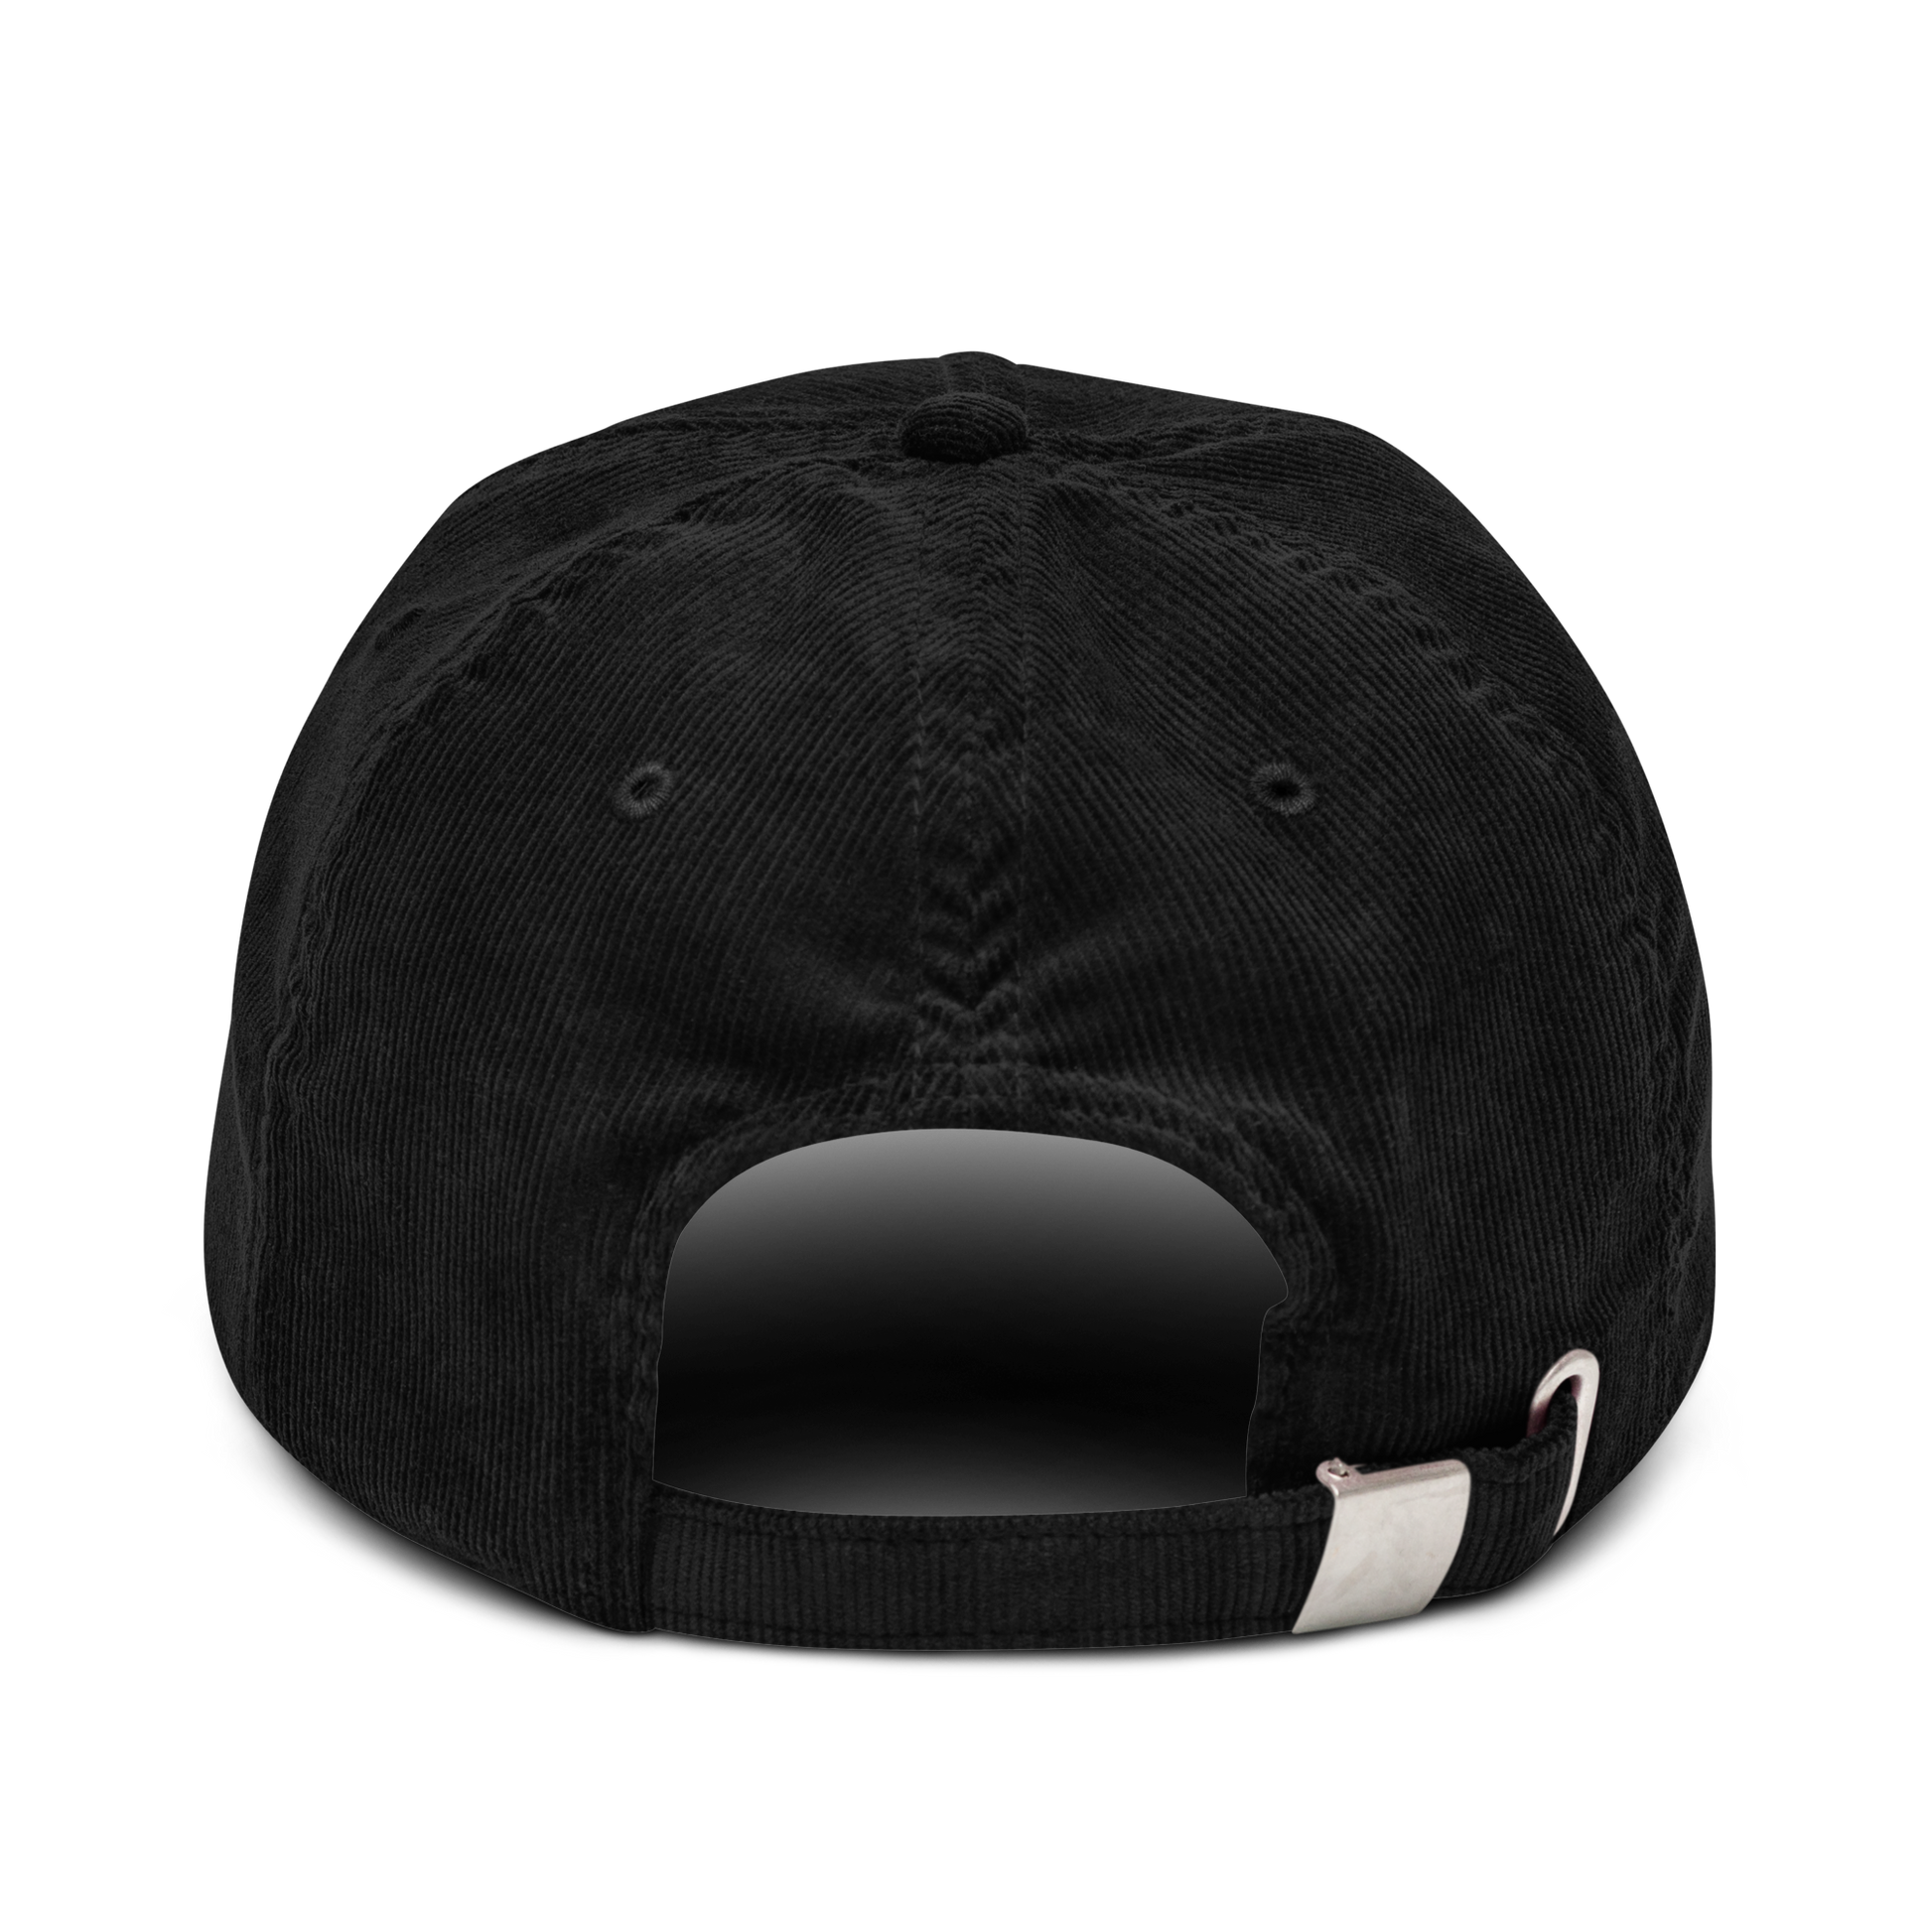 Back of a Black Corduroy Hat featuring an embroidered Boozy Fox logo on front. Shop Cool Corduroy Hats & Corduroy Caps Online - Boozy Fox